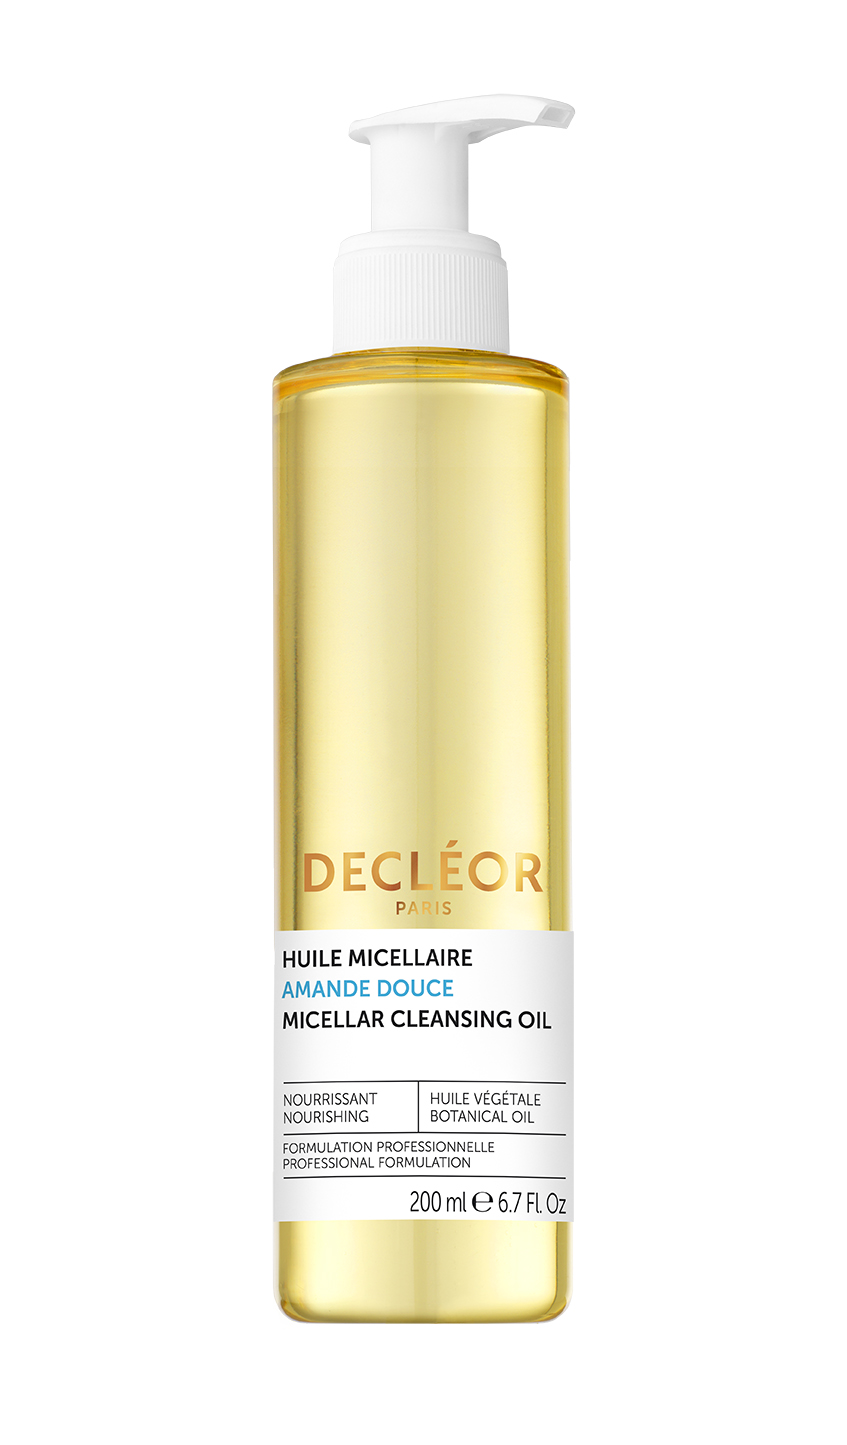 Decleor AMANDE DOUCE - HUILE MICELLAIRE / MICELLAR CLEANSING OIL 150ml